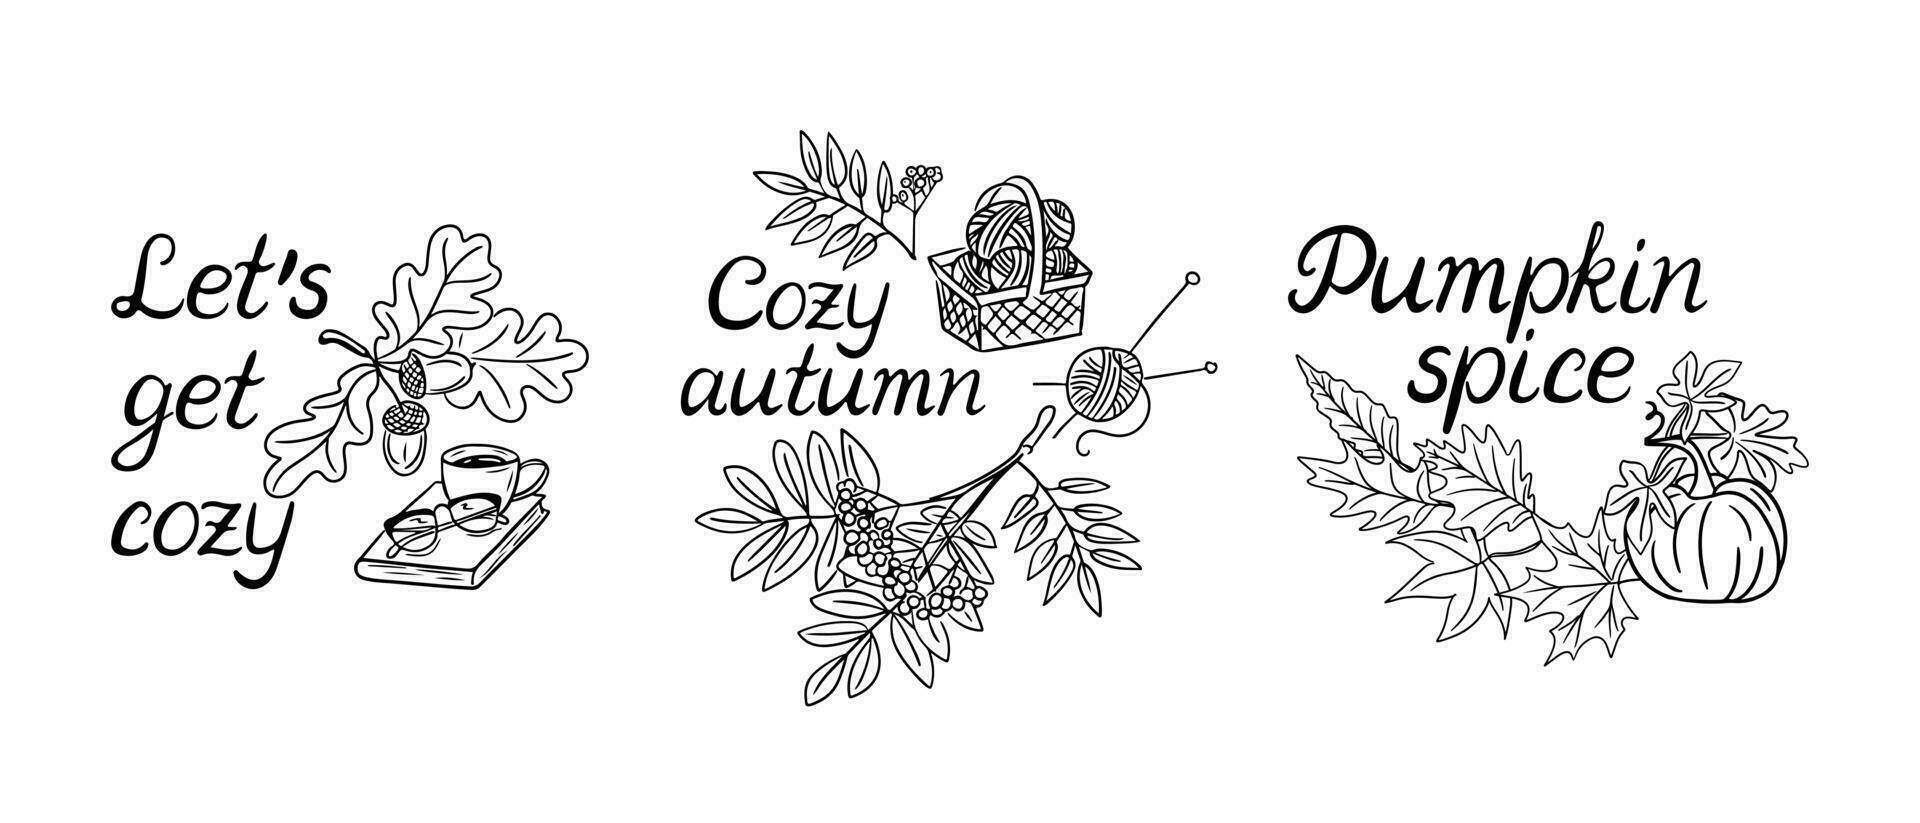 Collection of hand drawn autumn season quotes or phrases with handwritting for greeting cards, banners, posters design. Lets get cozy, cozy autumn, pumpkin spice slogans. Black doodle elements vector